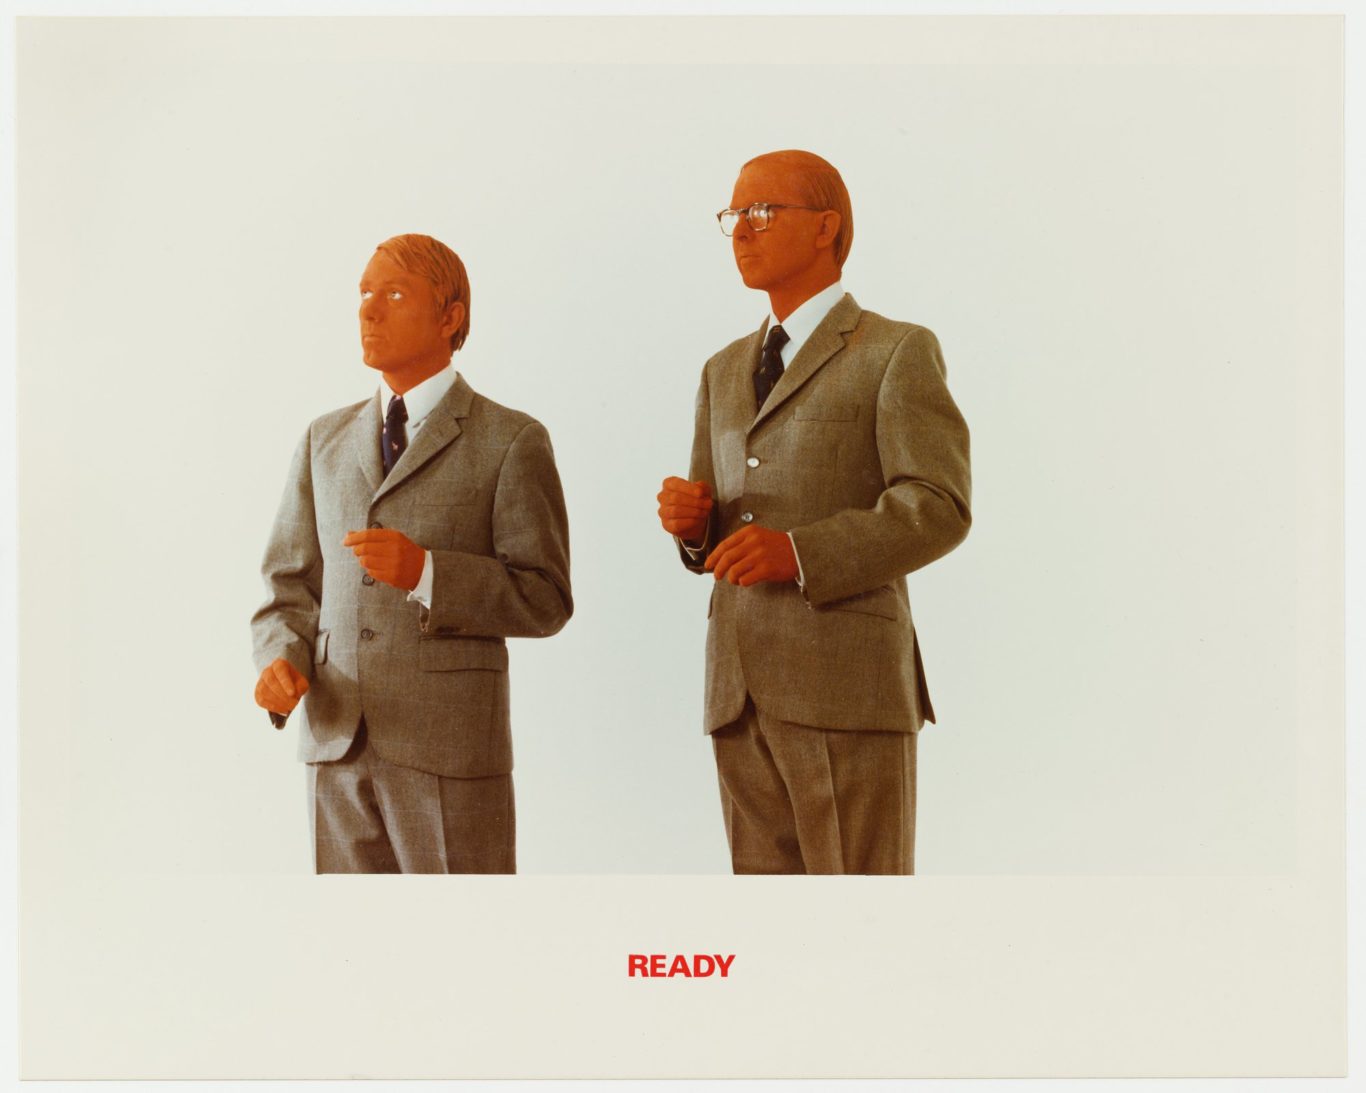 Gilbert & George. The Red Sculpture Album. 1975. Artist’s book of 11 chromogenic color prints with text, 15 3/16 x 19 7/8″ (38.5 x 50.5 cm). 